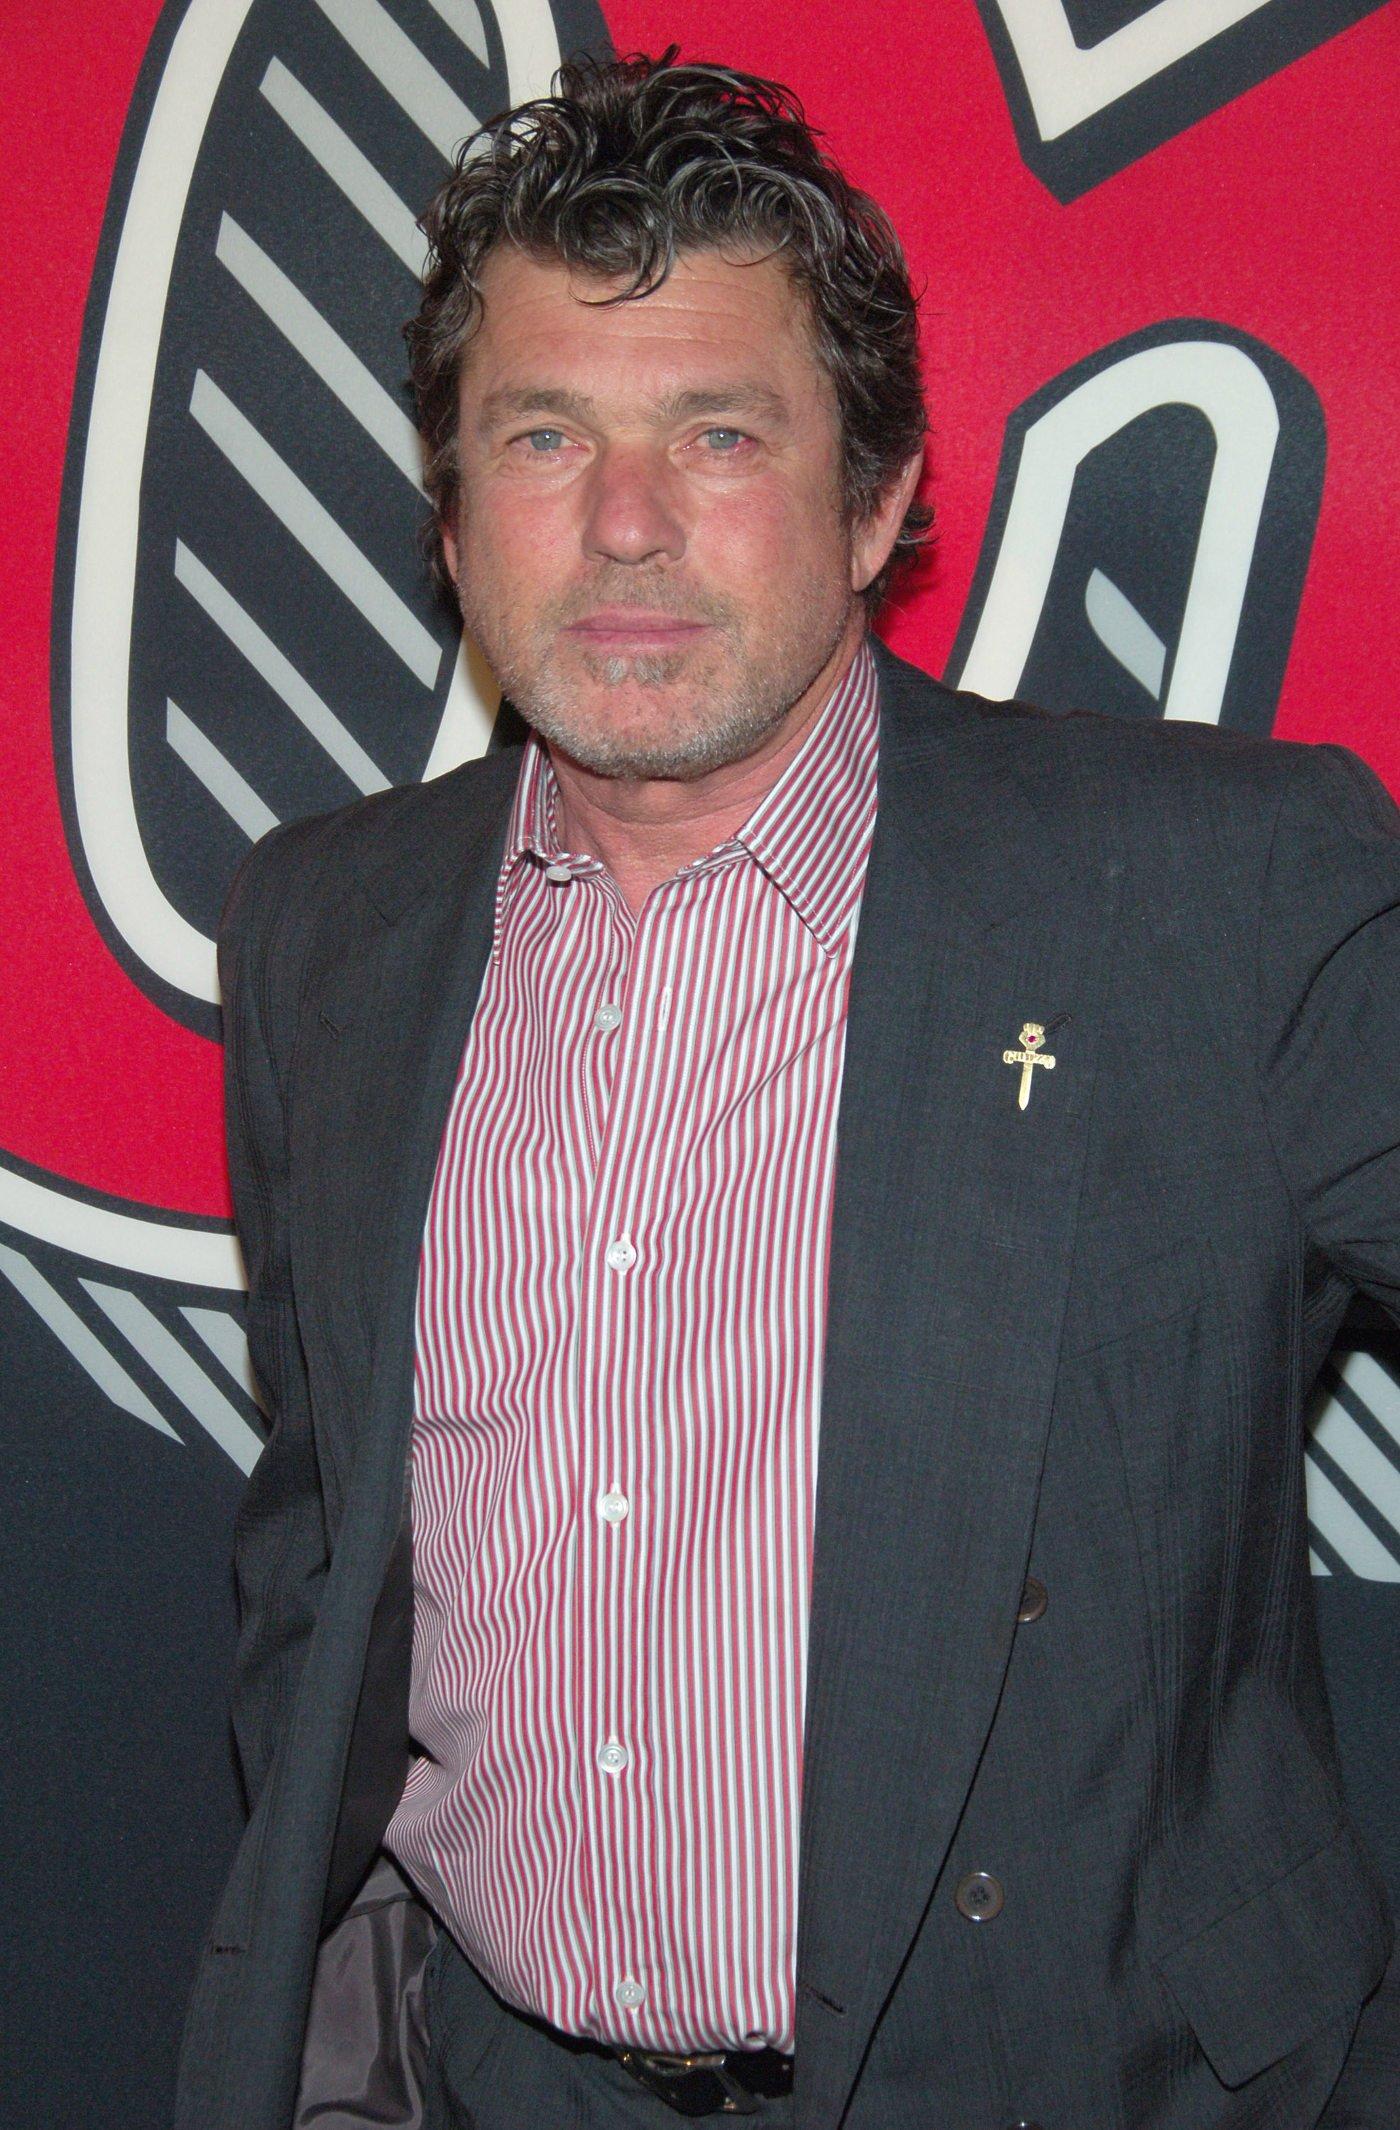 Jann Wenner photographed in 2006